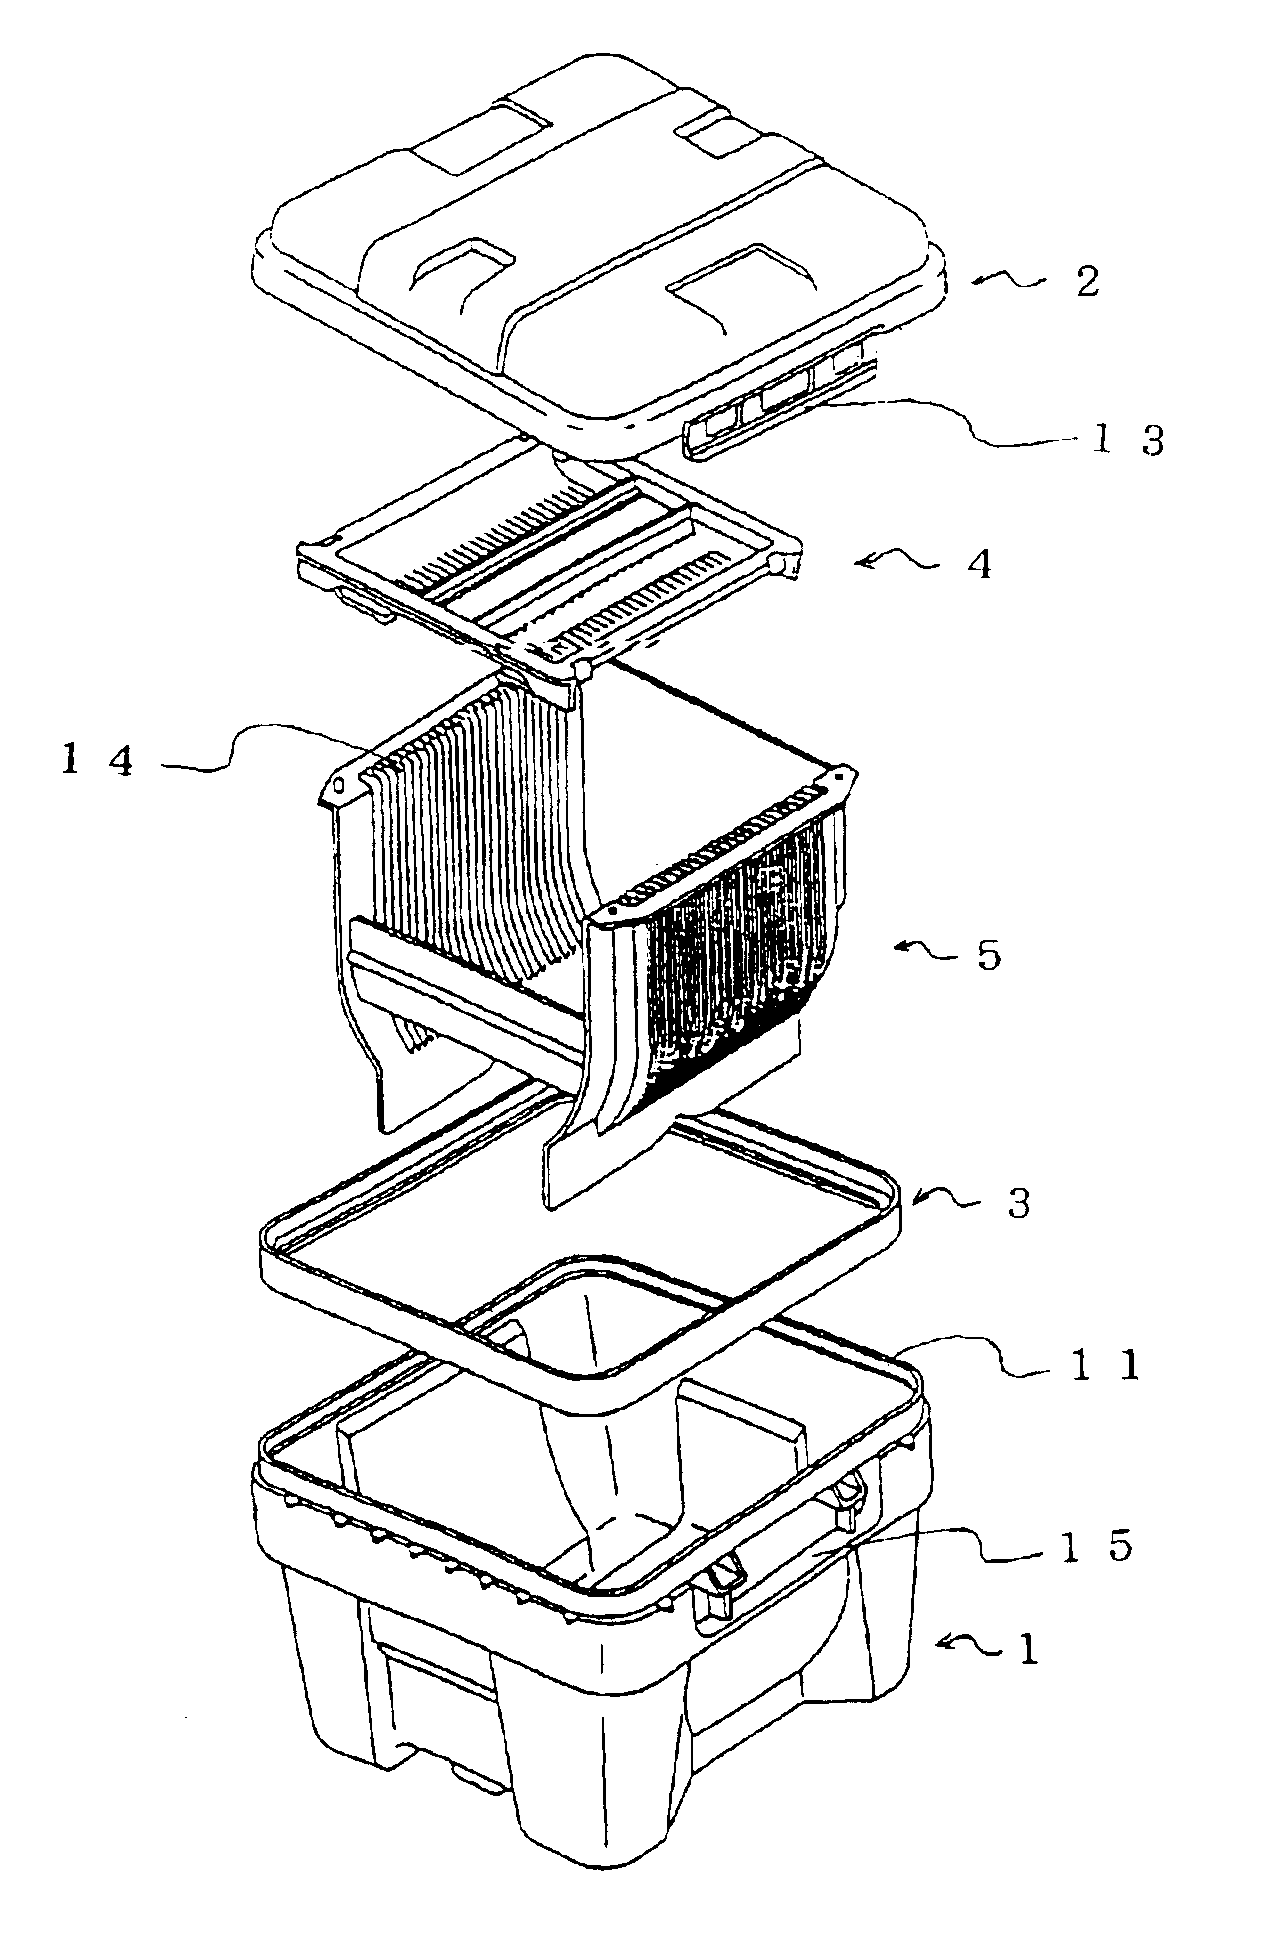 Gaskets for substrate containers